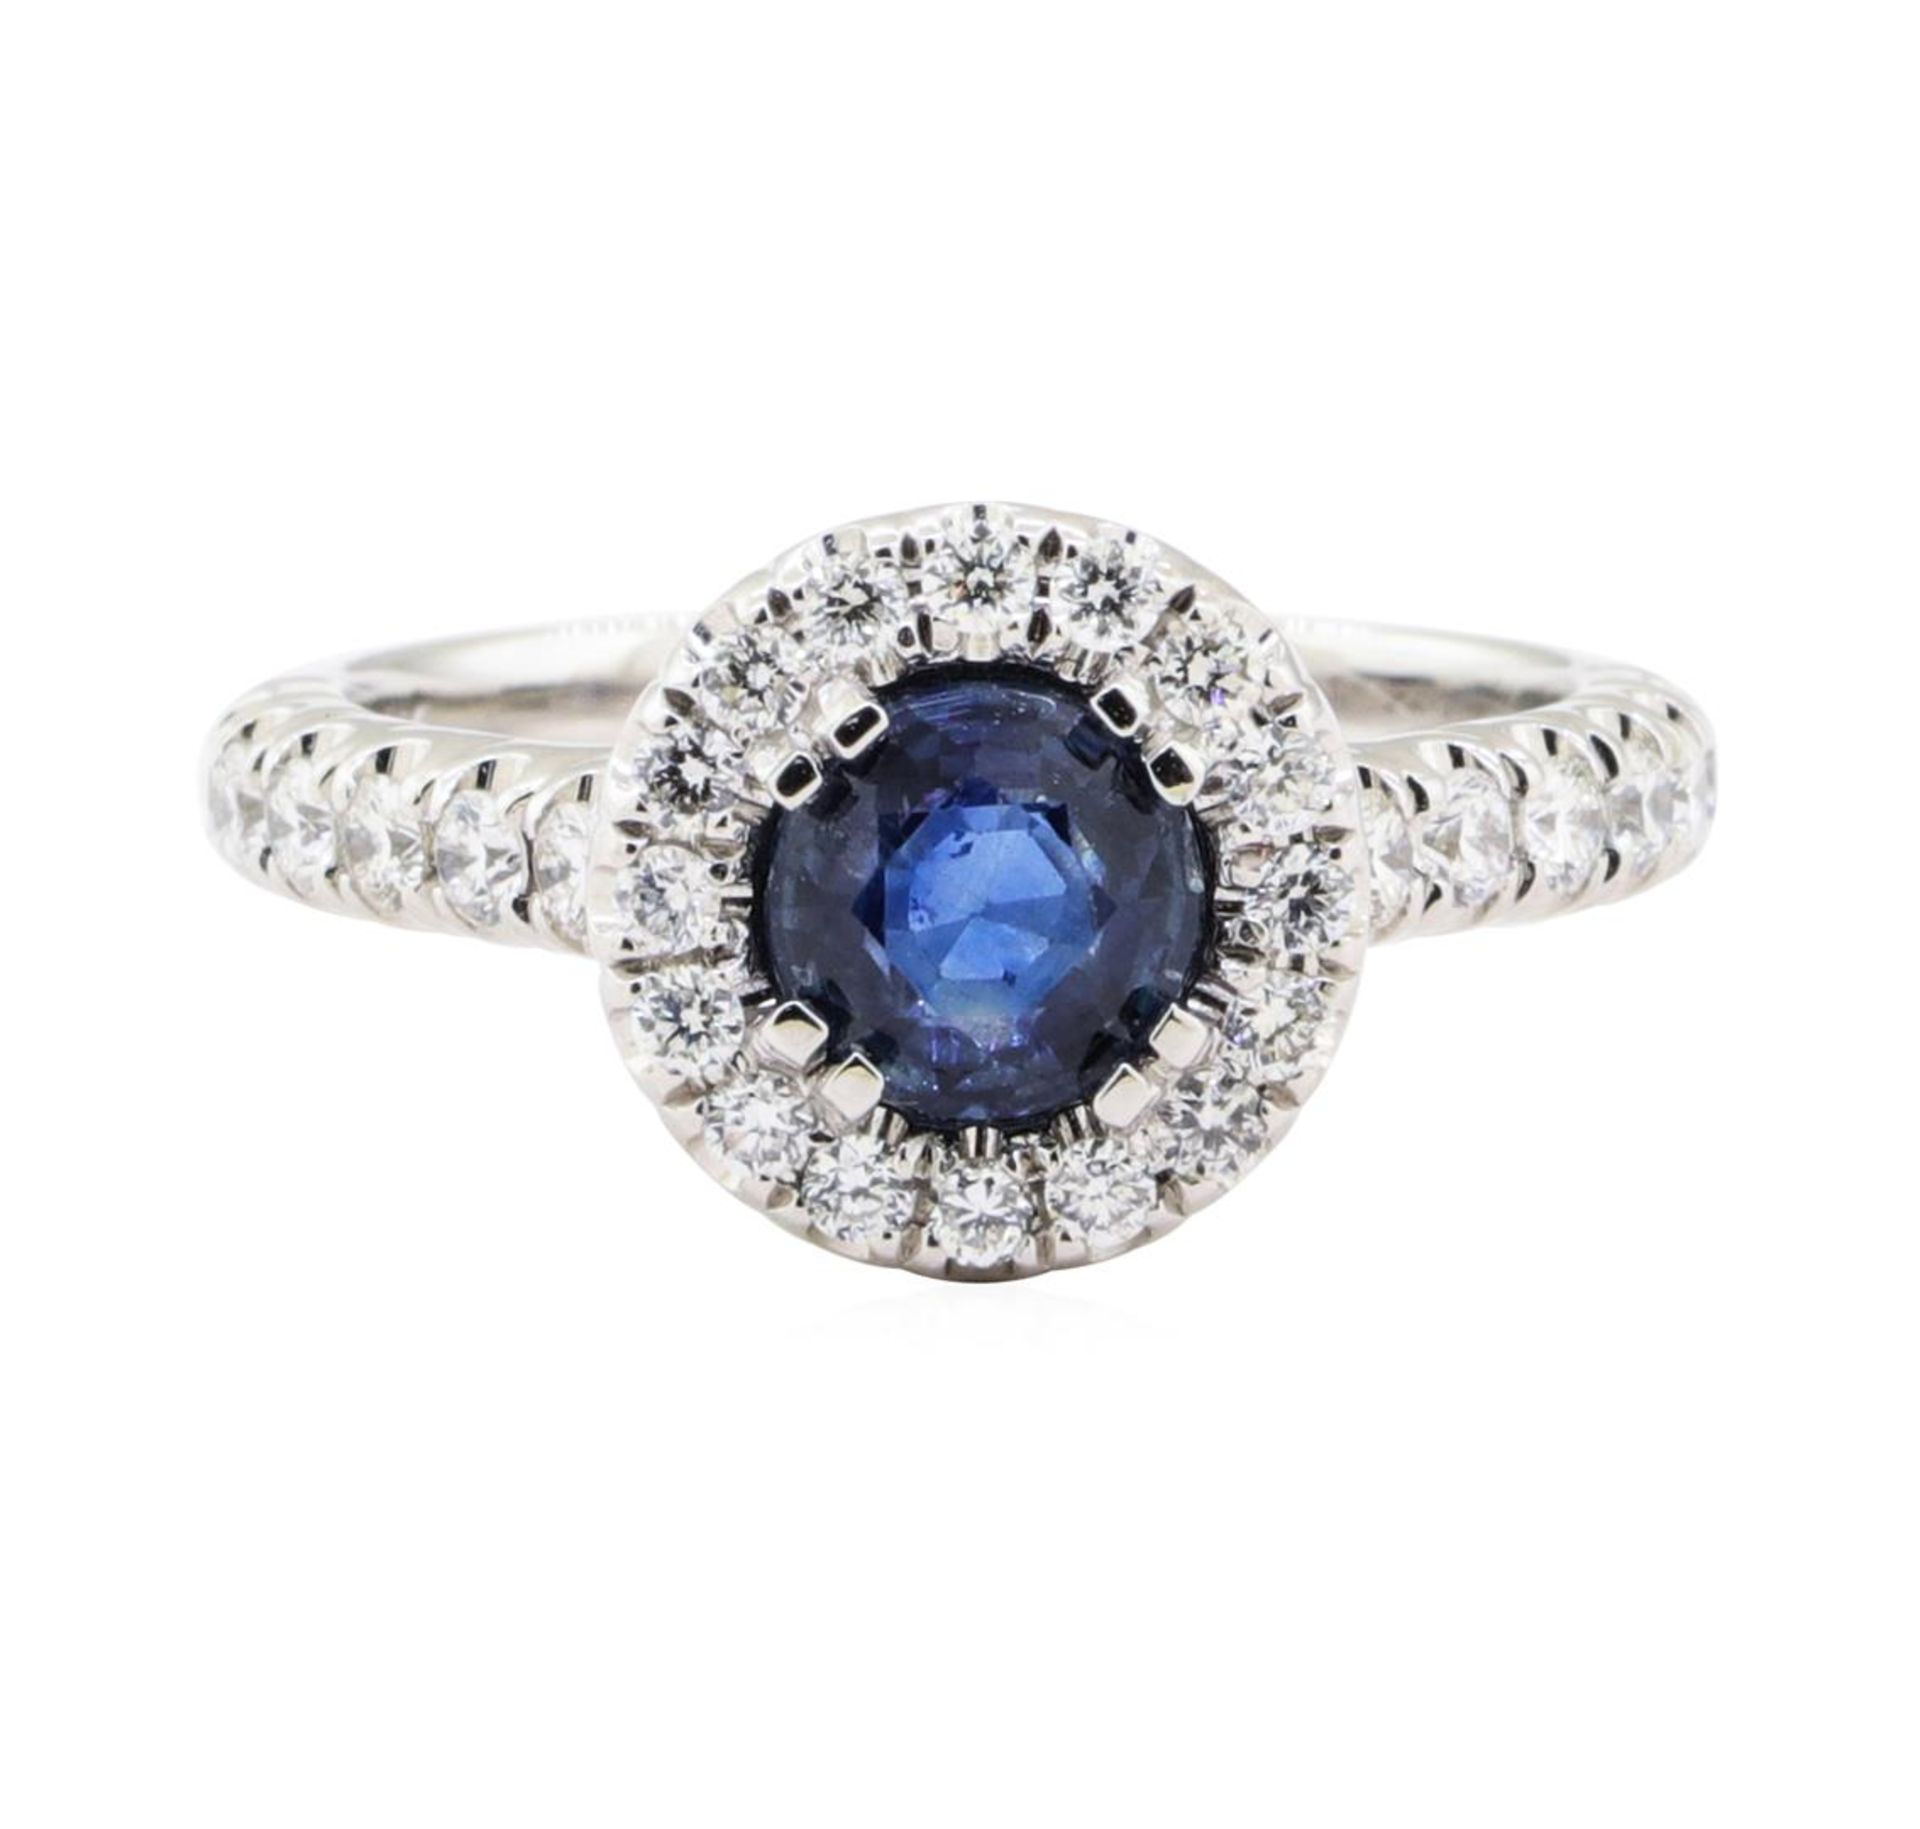 1.42 ctw Sapphire And Diamond Ring - 14KT White Gold - Image 2 of 5